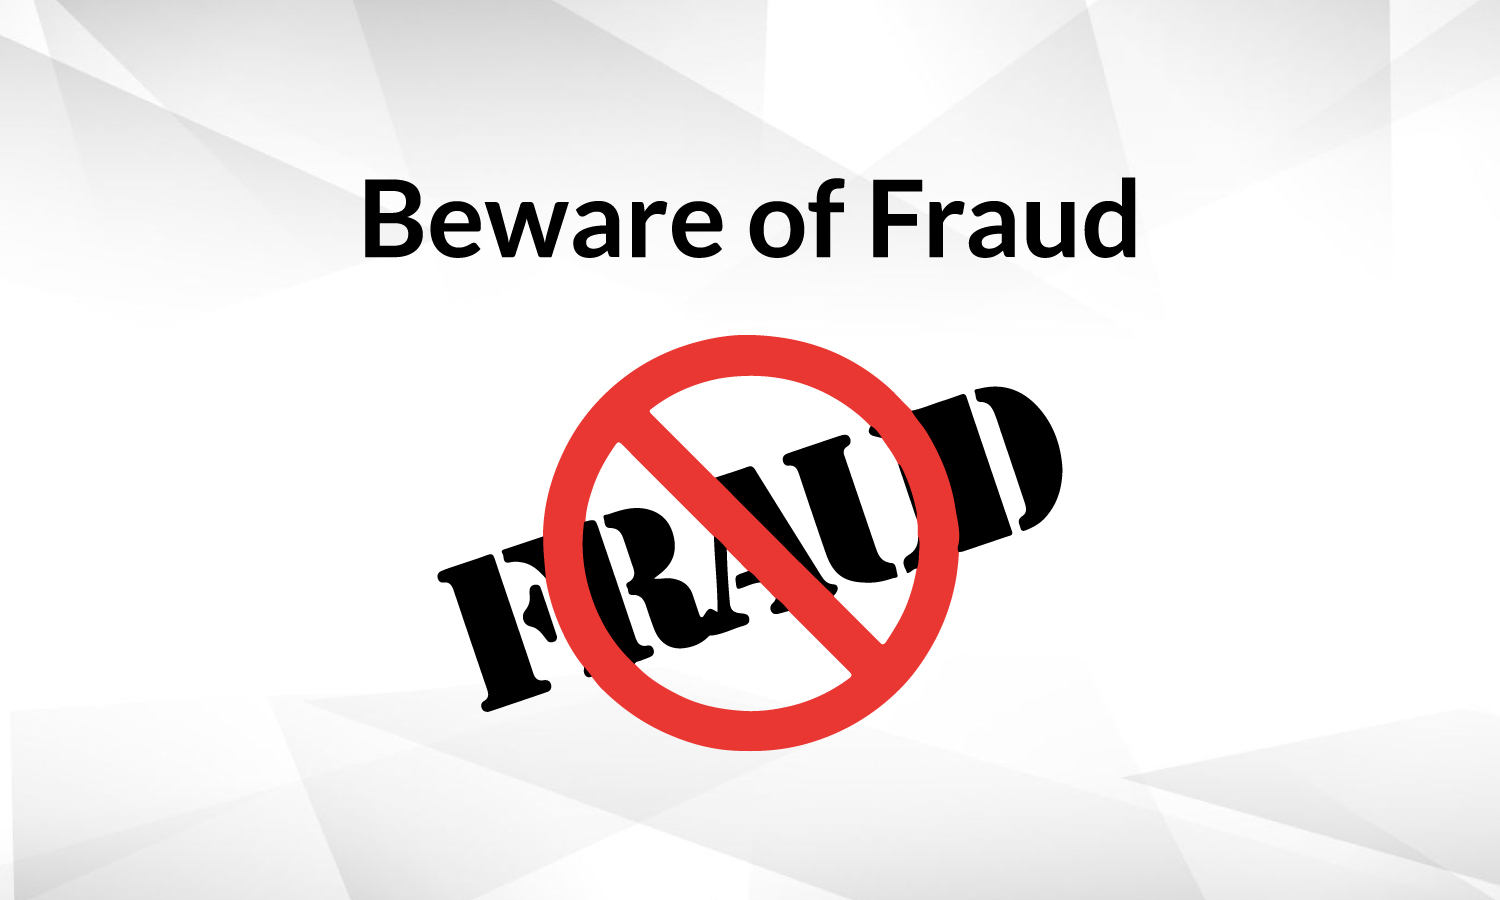 Beware of fraudsters: Organisations in UAE doesn't require to disclose their financial information to any person